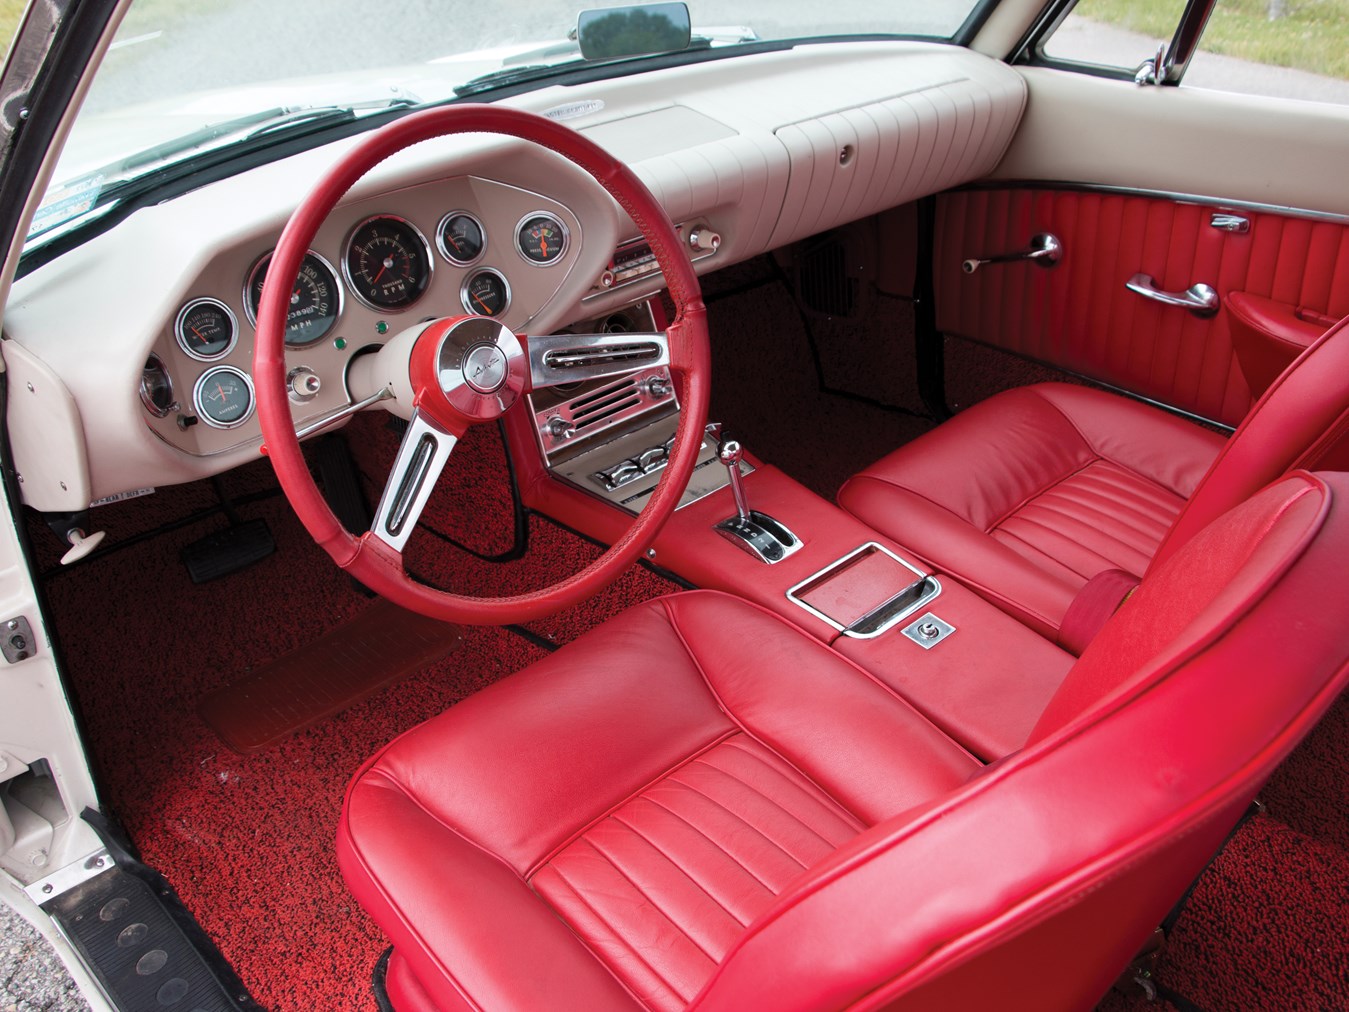 The interior design of the Studebaker Avanti is very european and quite unlike the jukebox interior style of most American cars of the period.